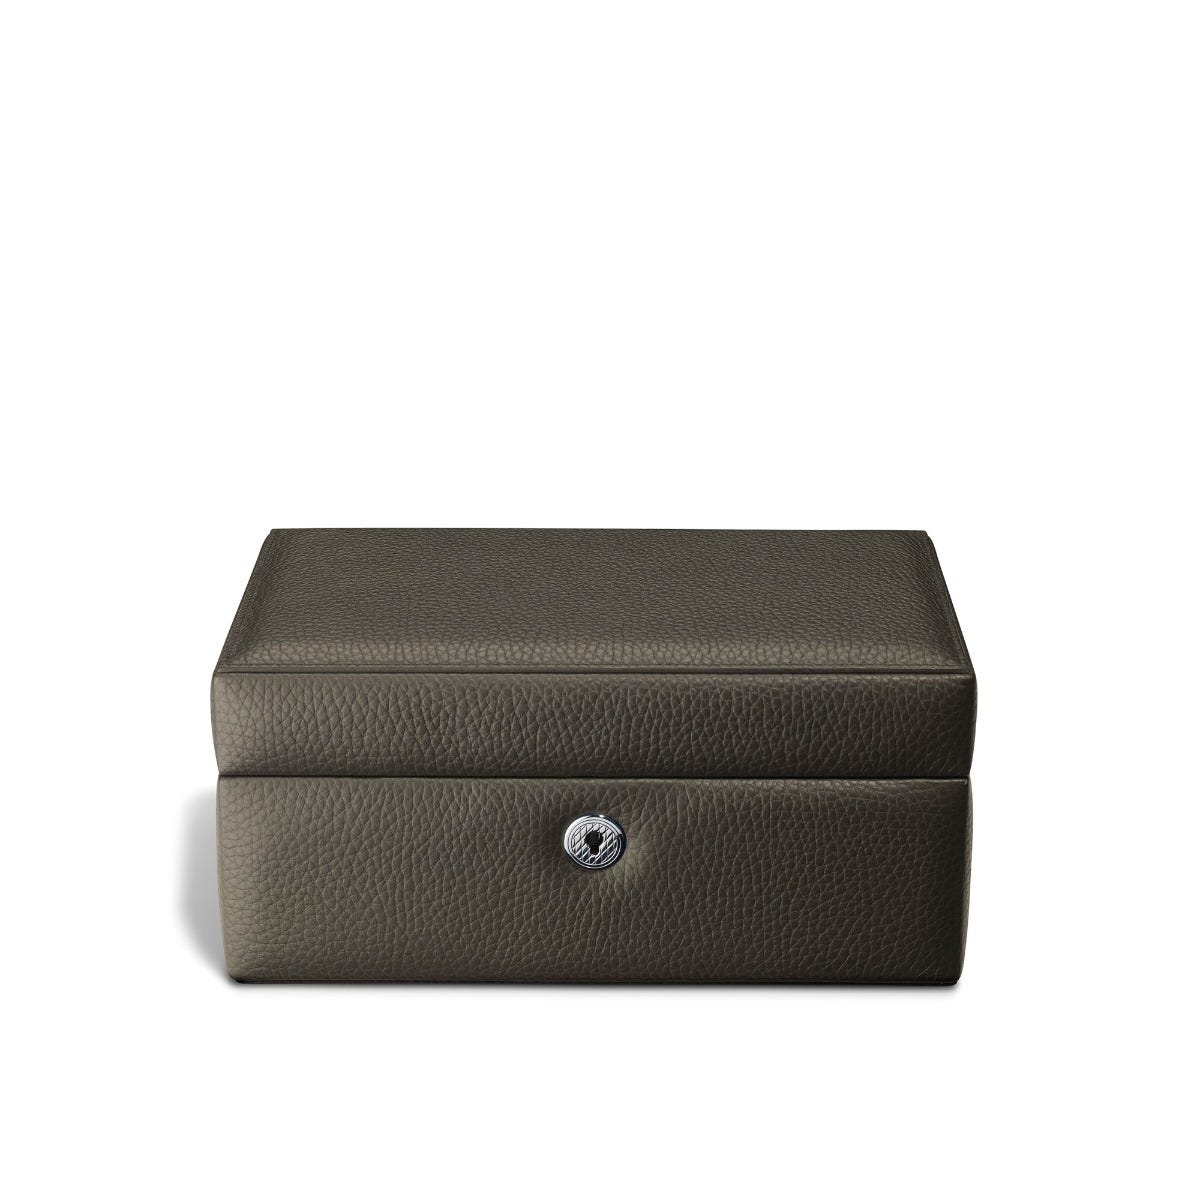 GMT Watch Box 3 in Soft Grain Leather